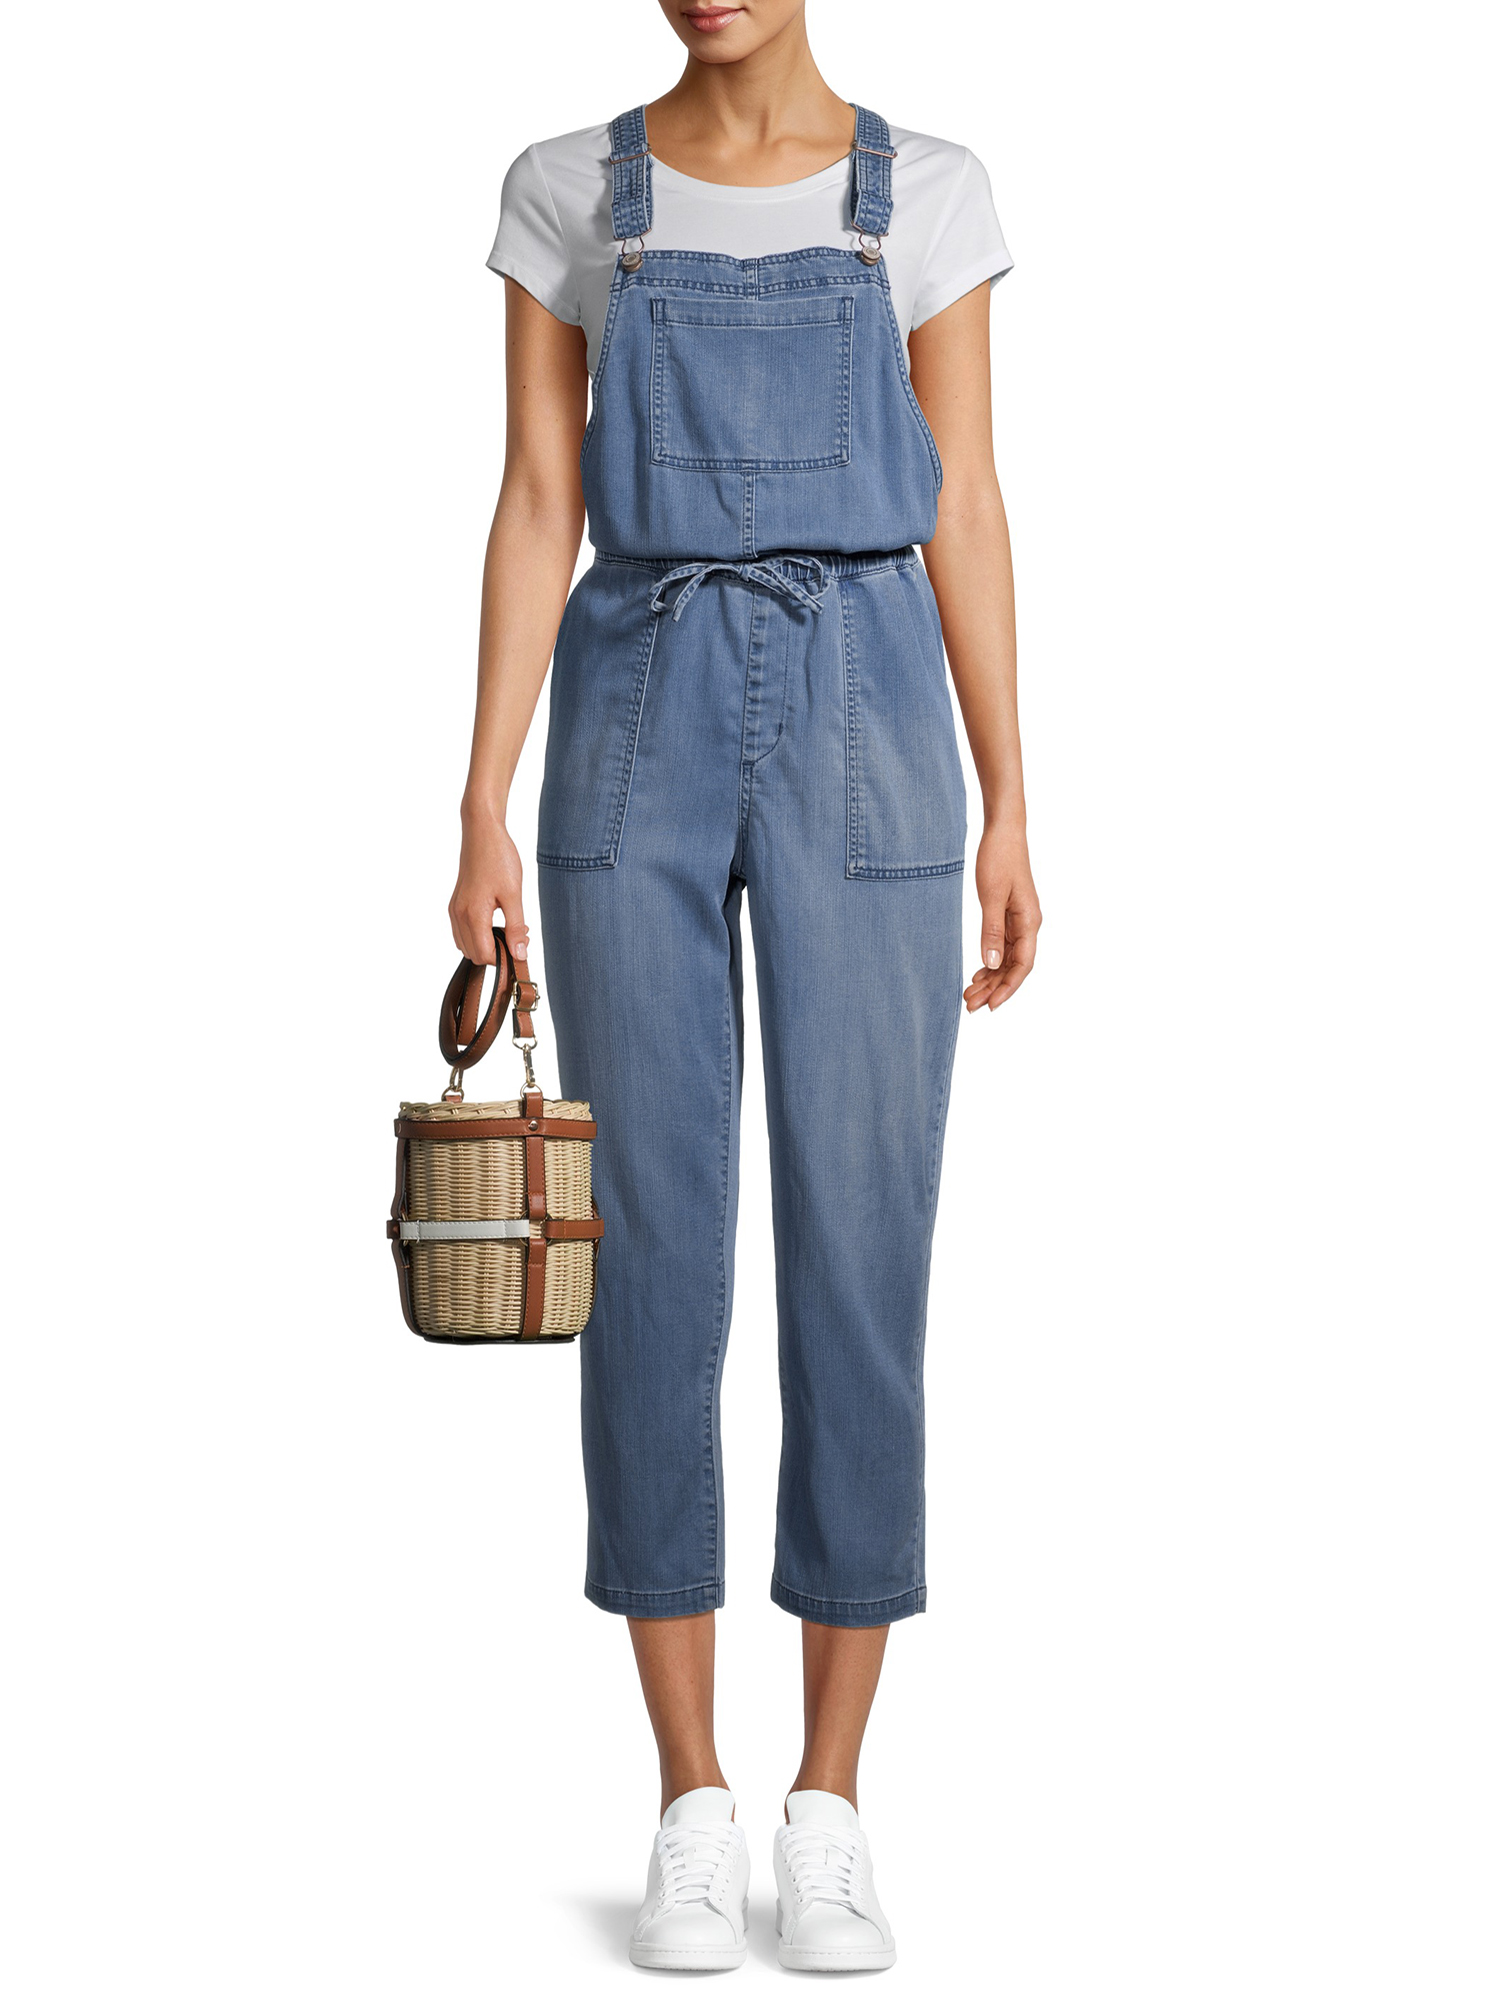 Time and Tru Women's Lightweight Soft Overalls - image 4 of 6